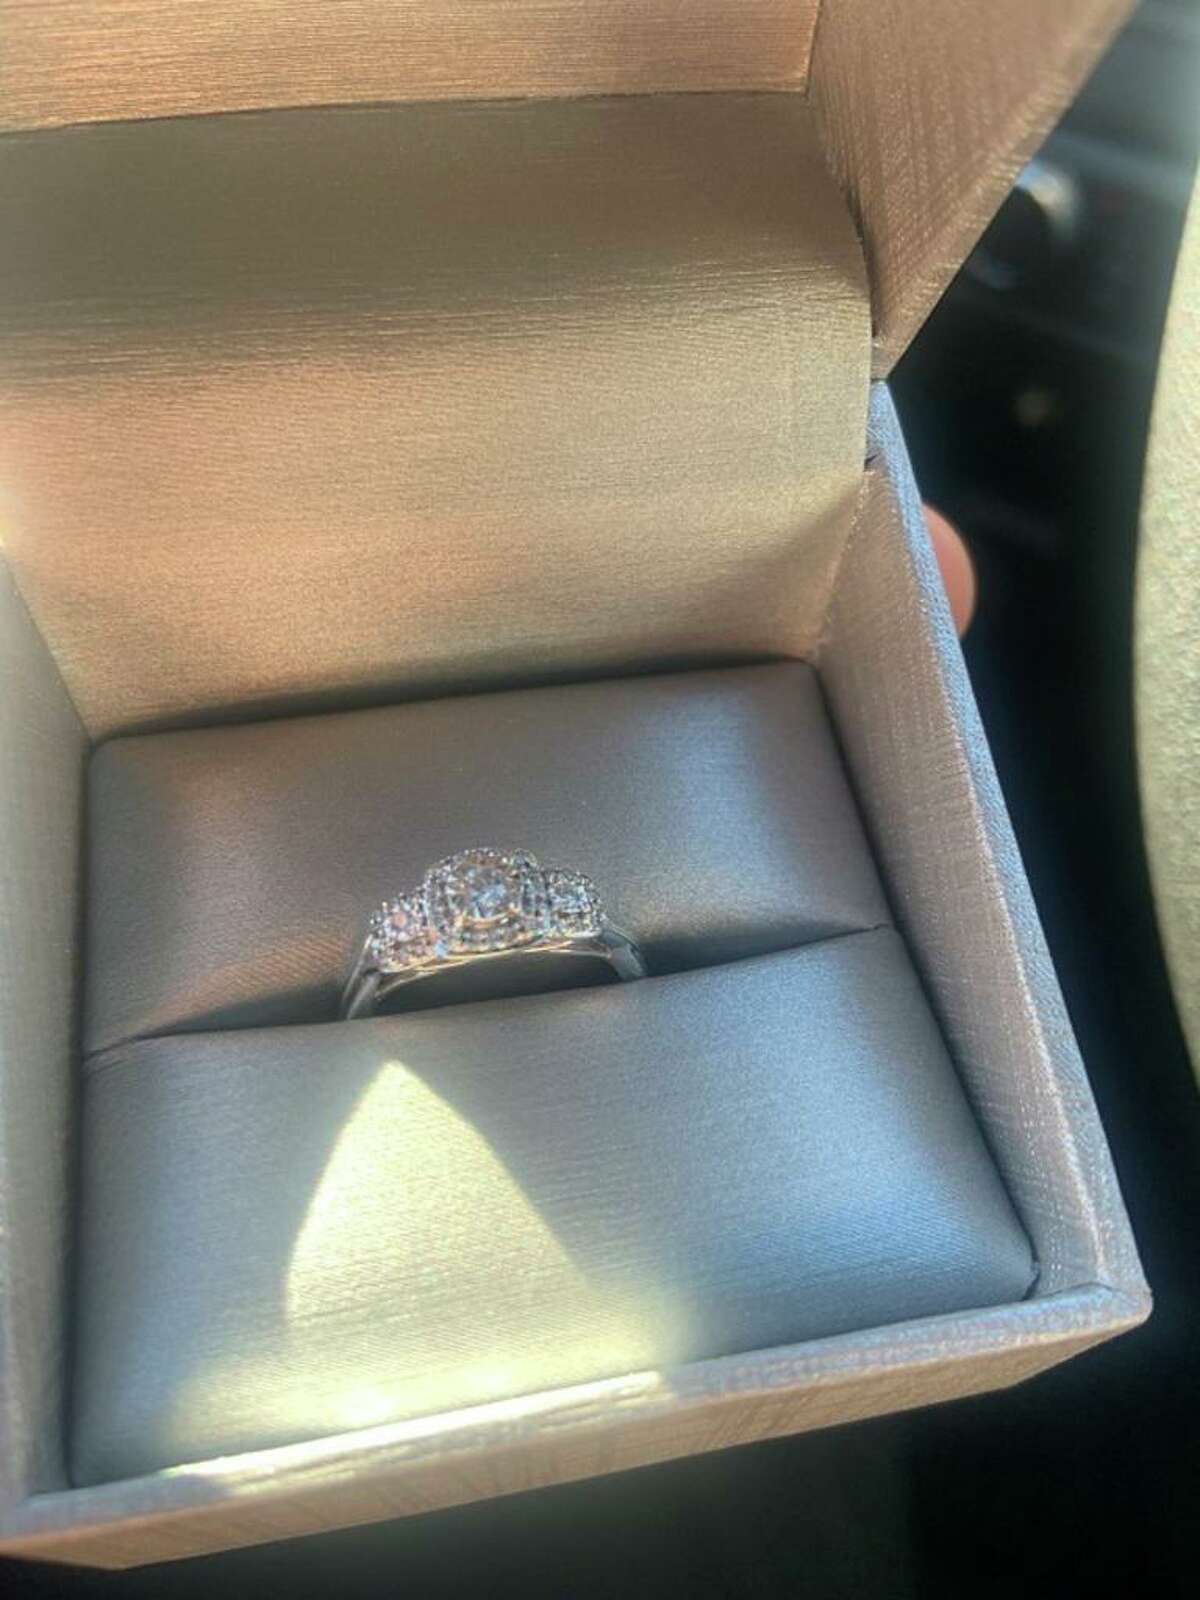 Milford Police are crediting an honest citizen and social media with helping a local man get back the diamond ring he intended to give his girlfriend.